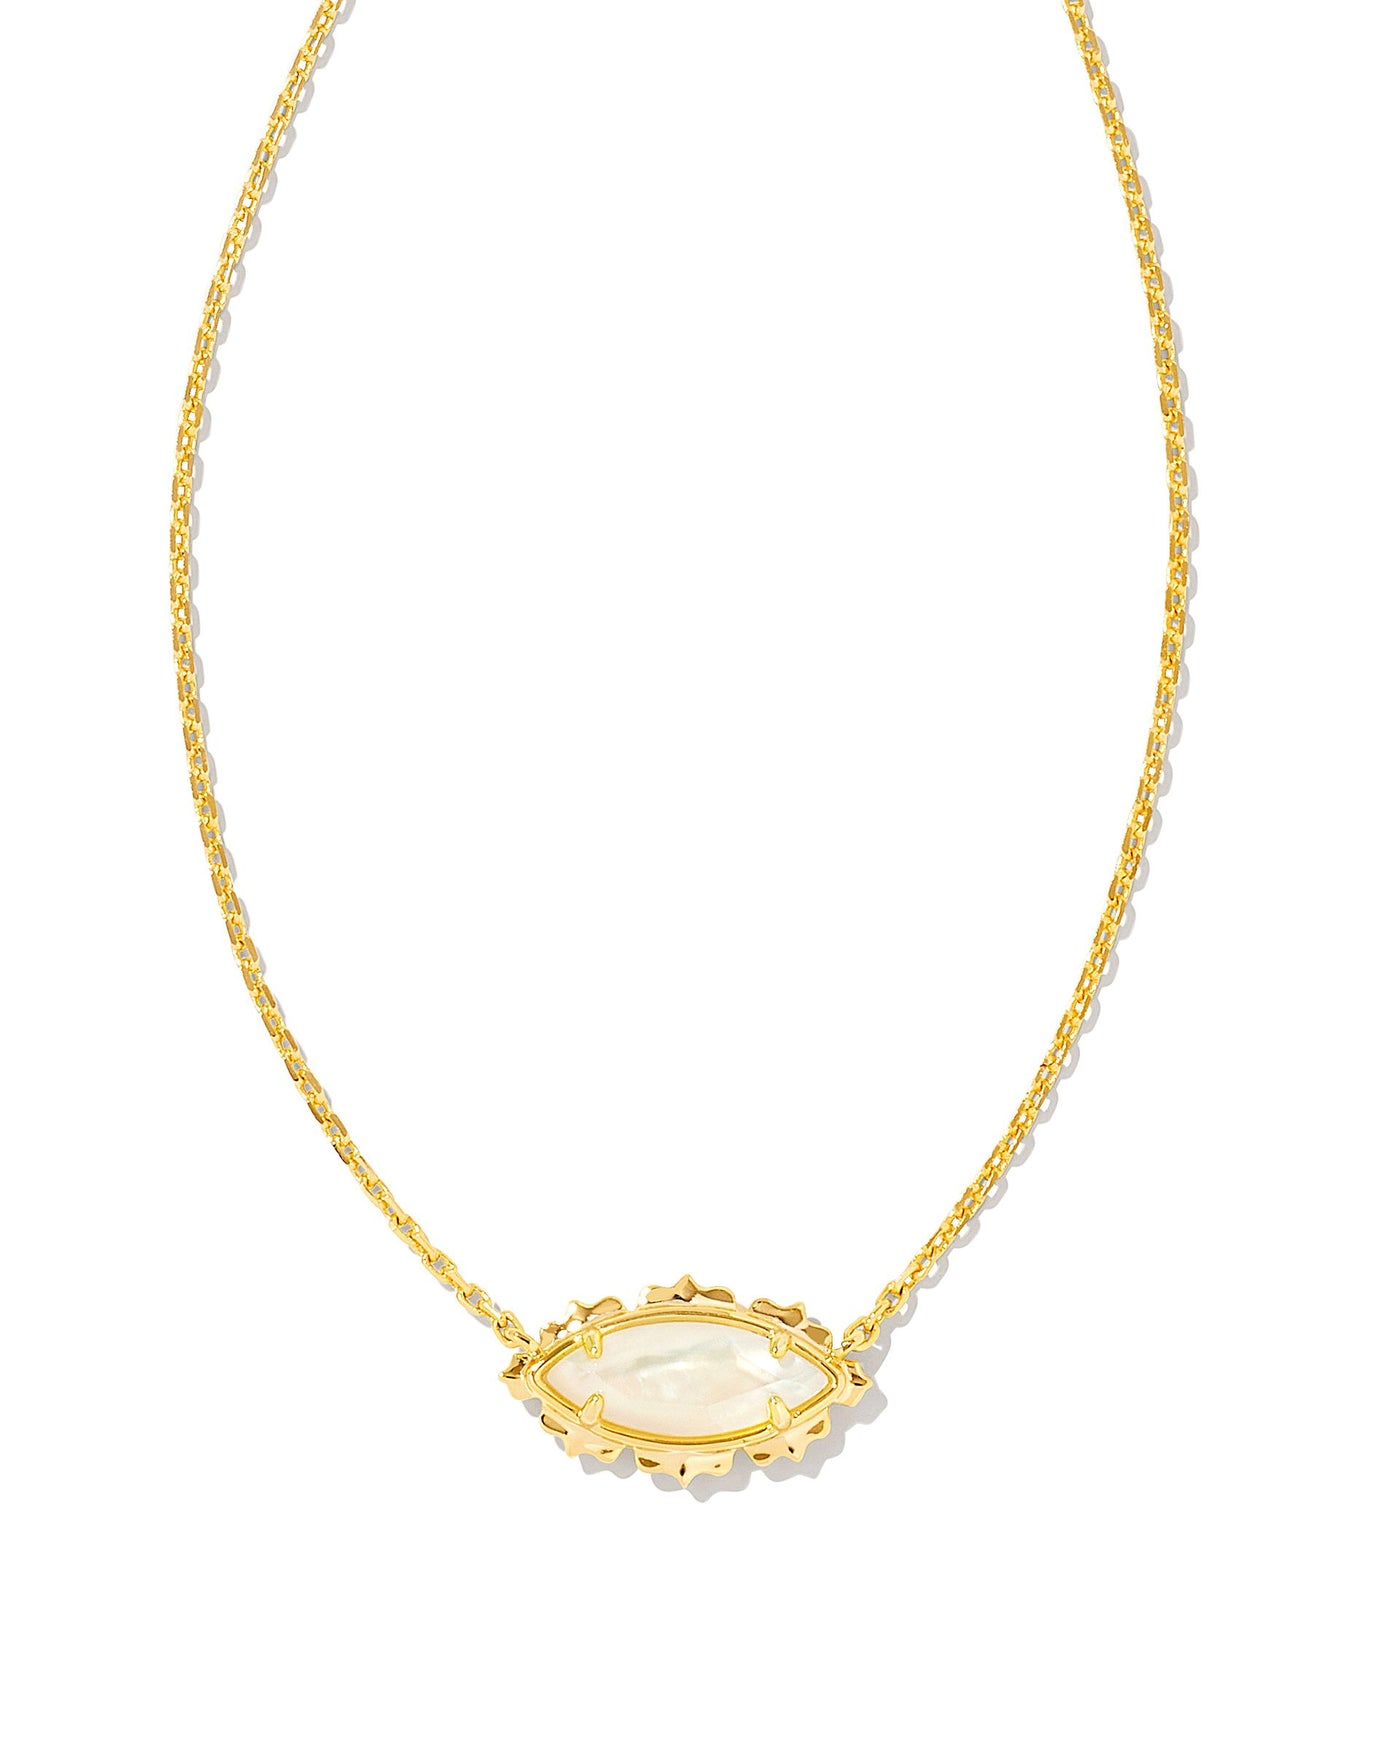 Kendra Scott Genevieve Short Pendant Necklace - Gold-Necklaces-Kendra Scott-Market Street Nest, Fashionable Clothing, Shoes and Home Décor Located in Mabank, TX